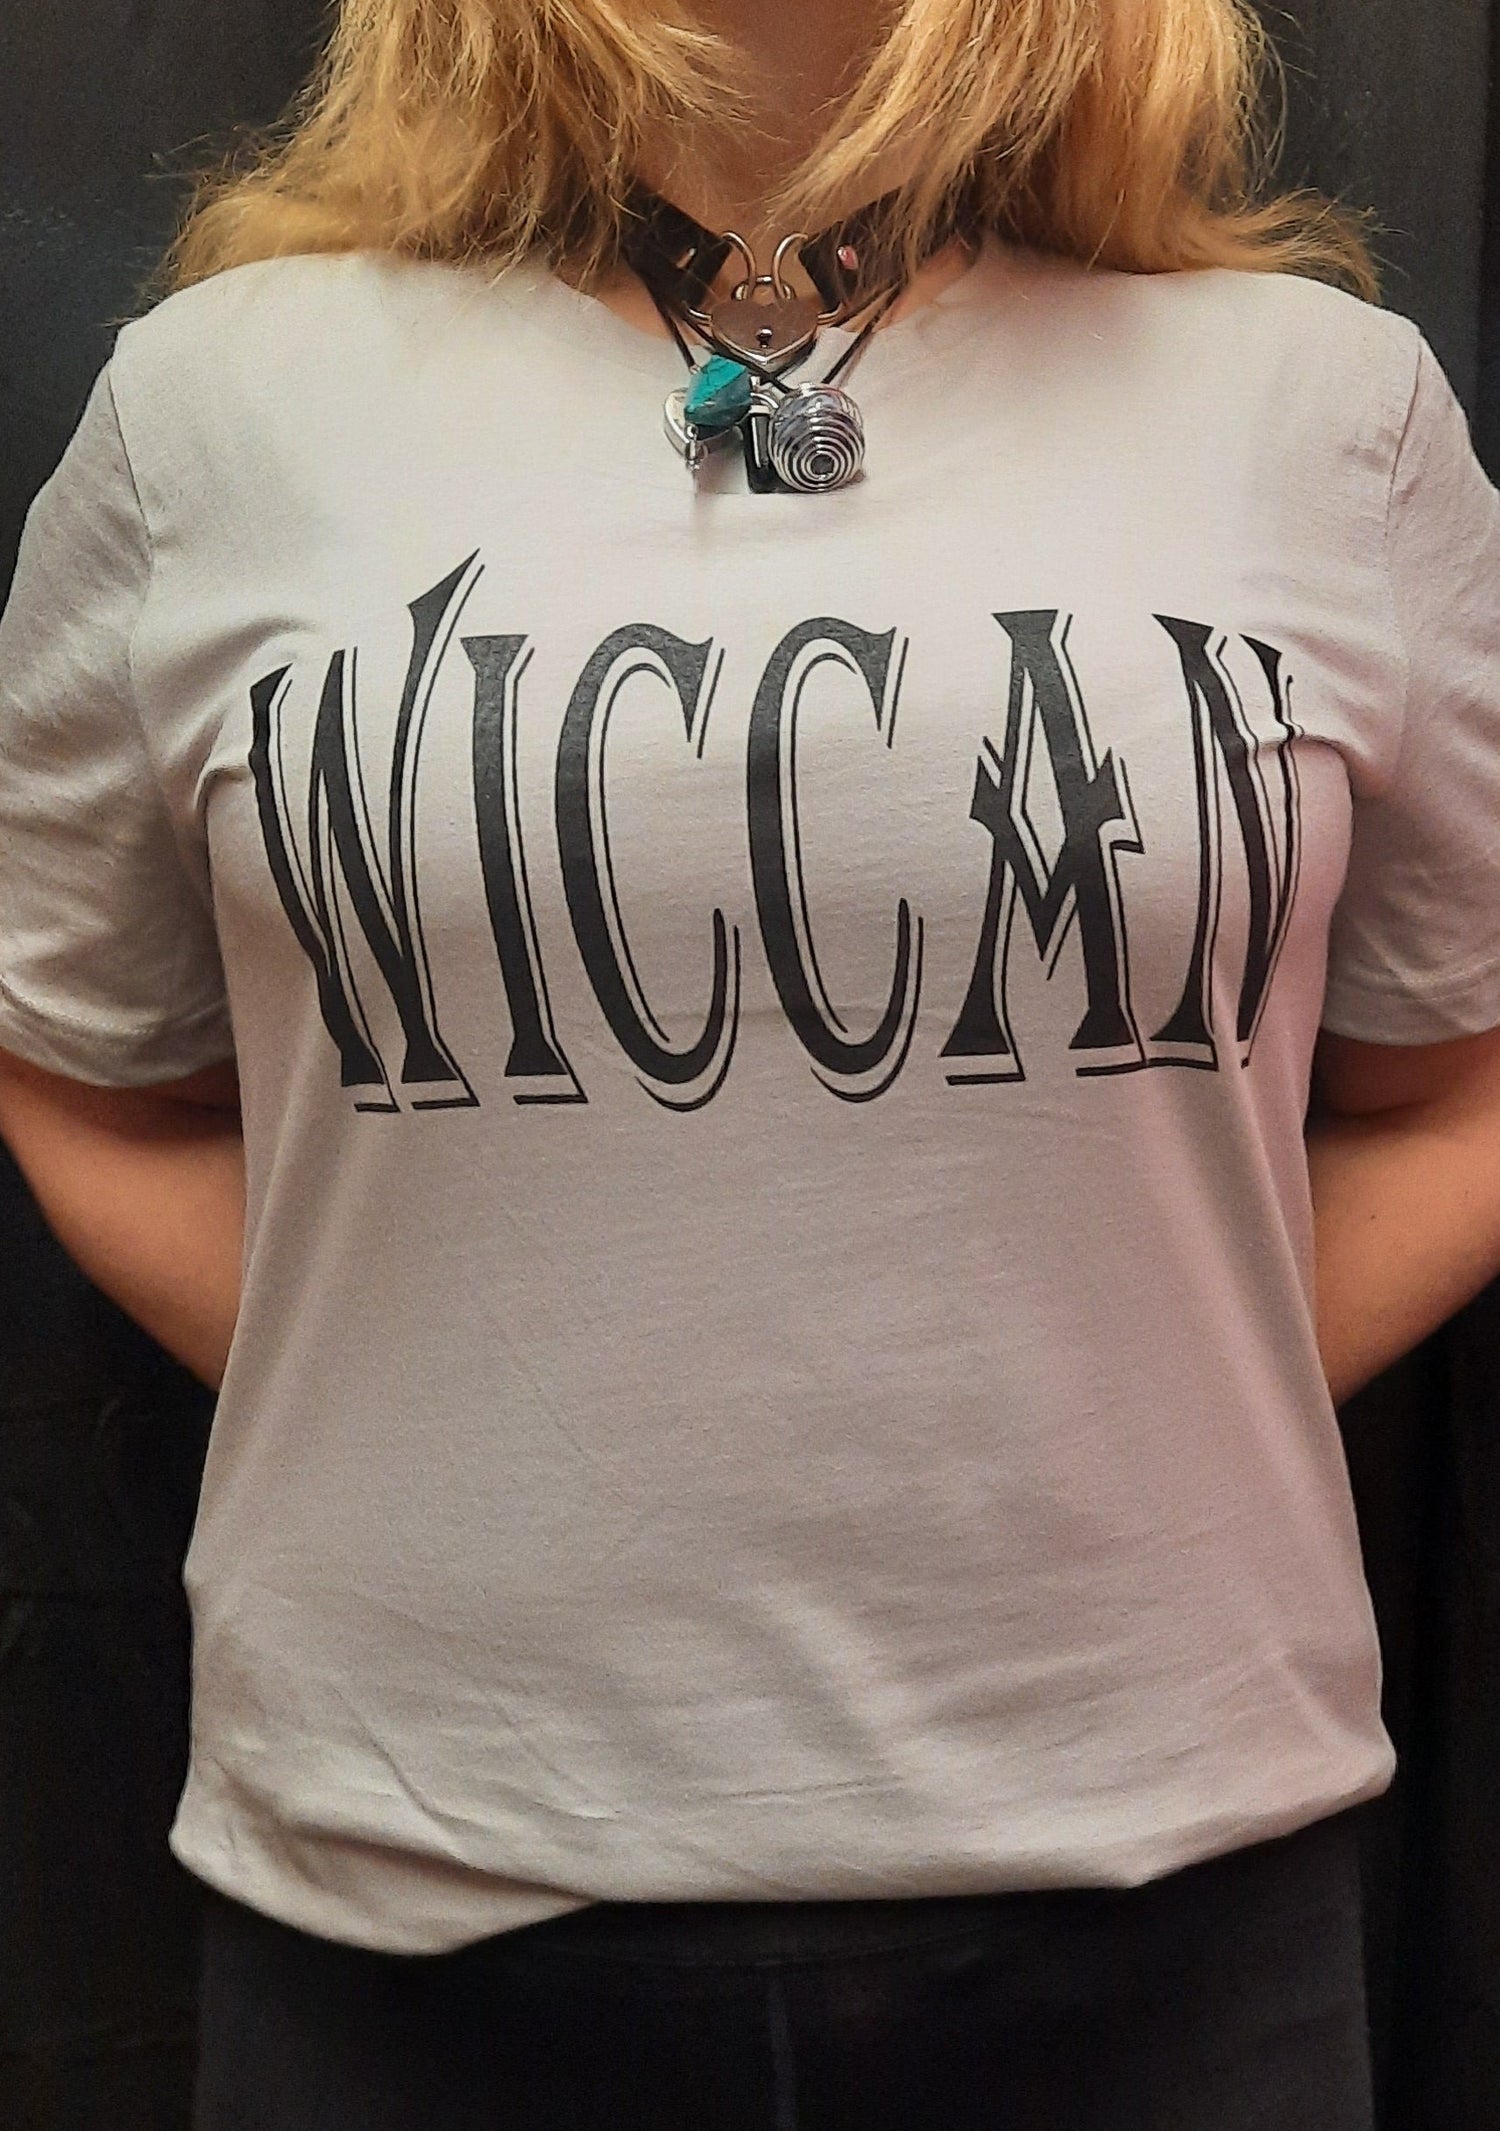 Bella Canvas short sleeve T-Shirt, size medium.  "Wiccan" design on front.  Earth, Air, Fire, Water, Spirit design on back.